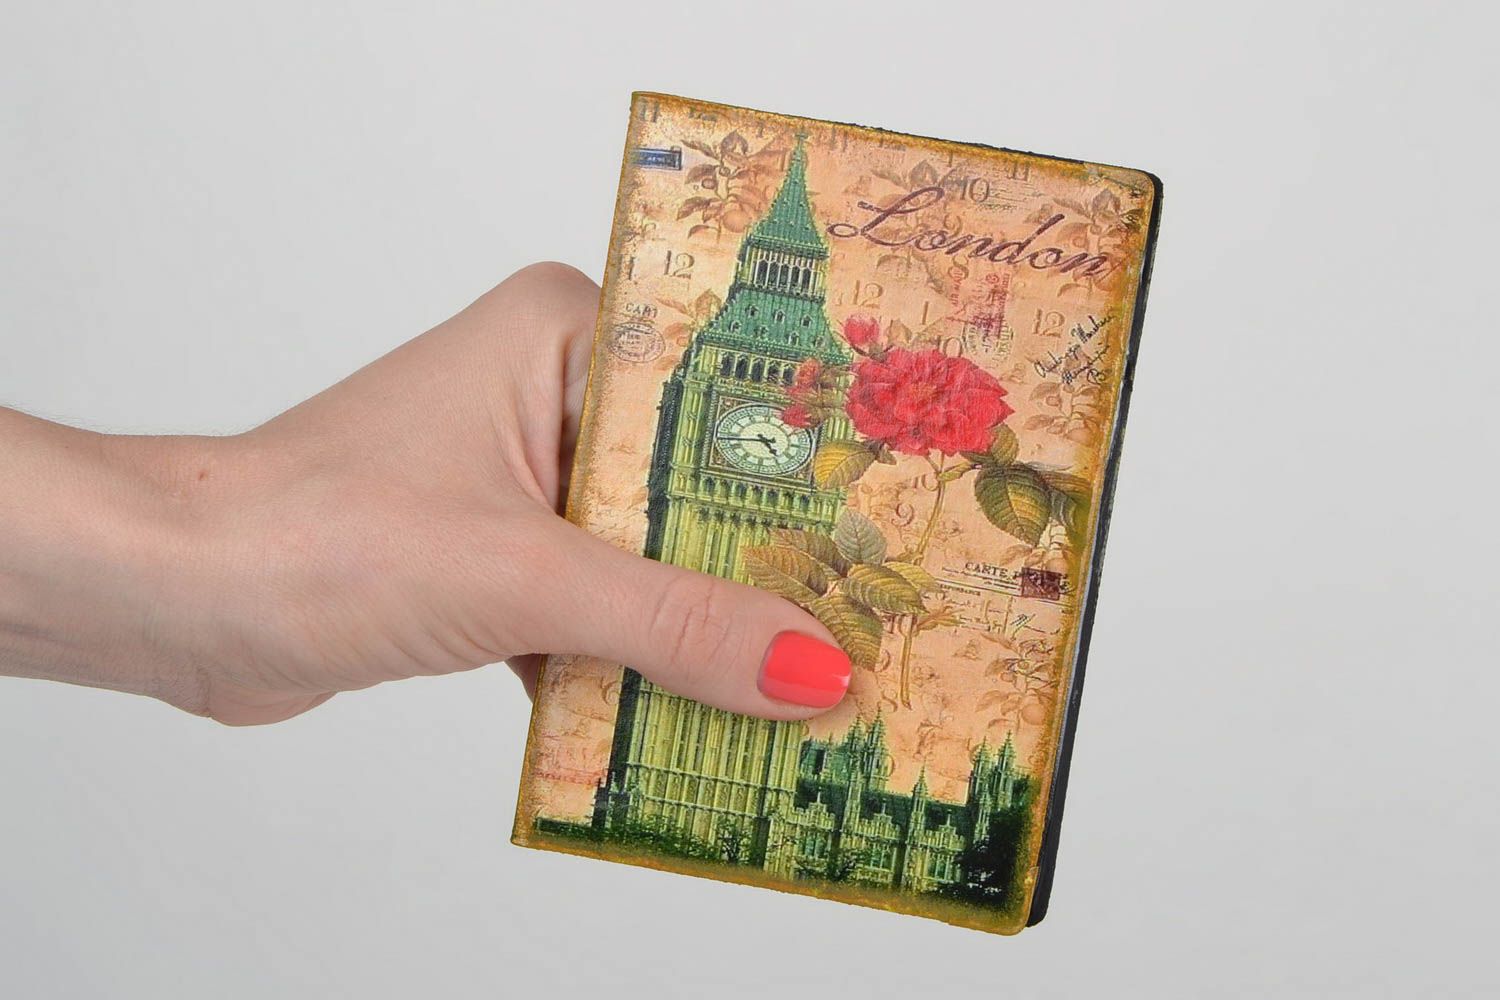 Handmade faux leather passport cover with decoupage image of Big Ben and rose photo 2